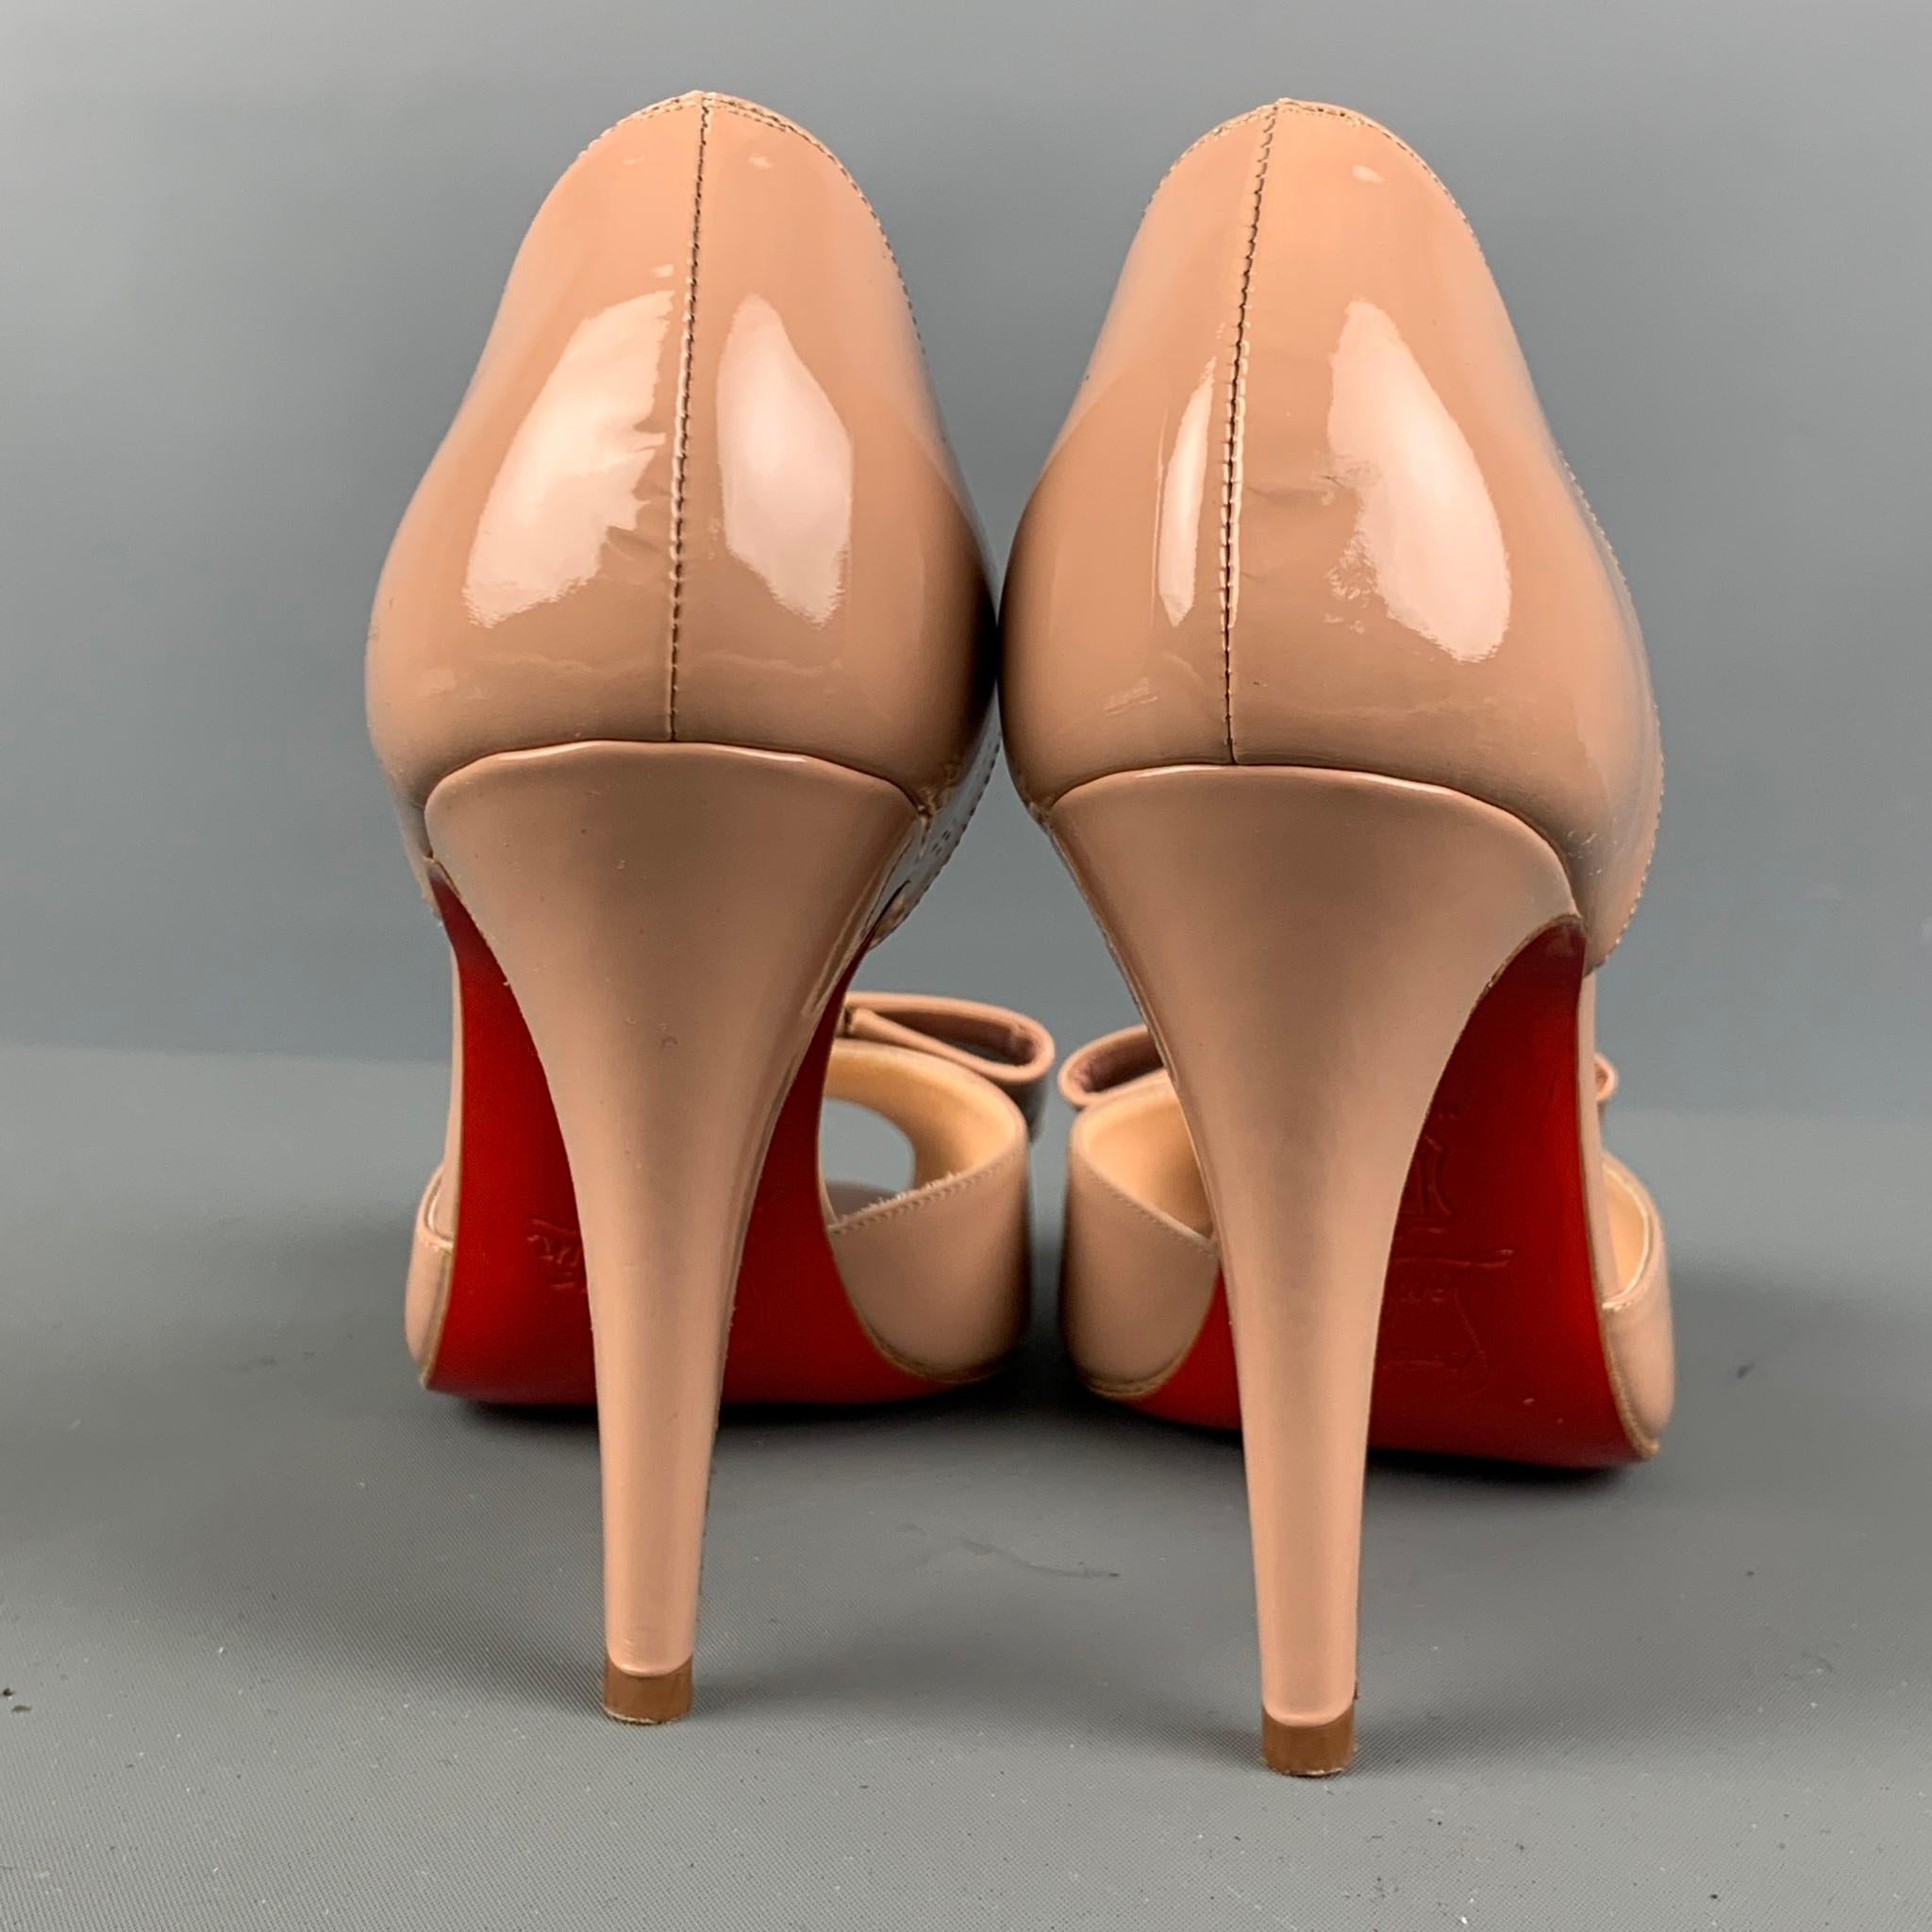 Women's CHRISTIAN LOUBOUTIN Size 6 Beige Nude Patent Leather D'Orsay Pumps